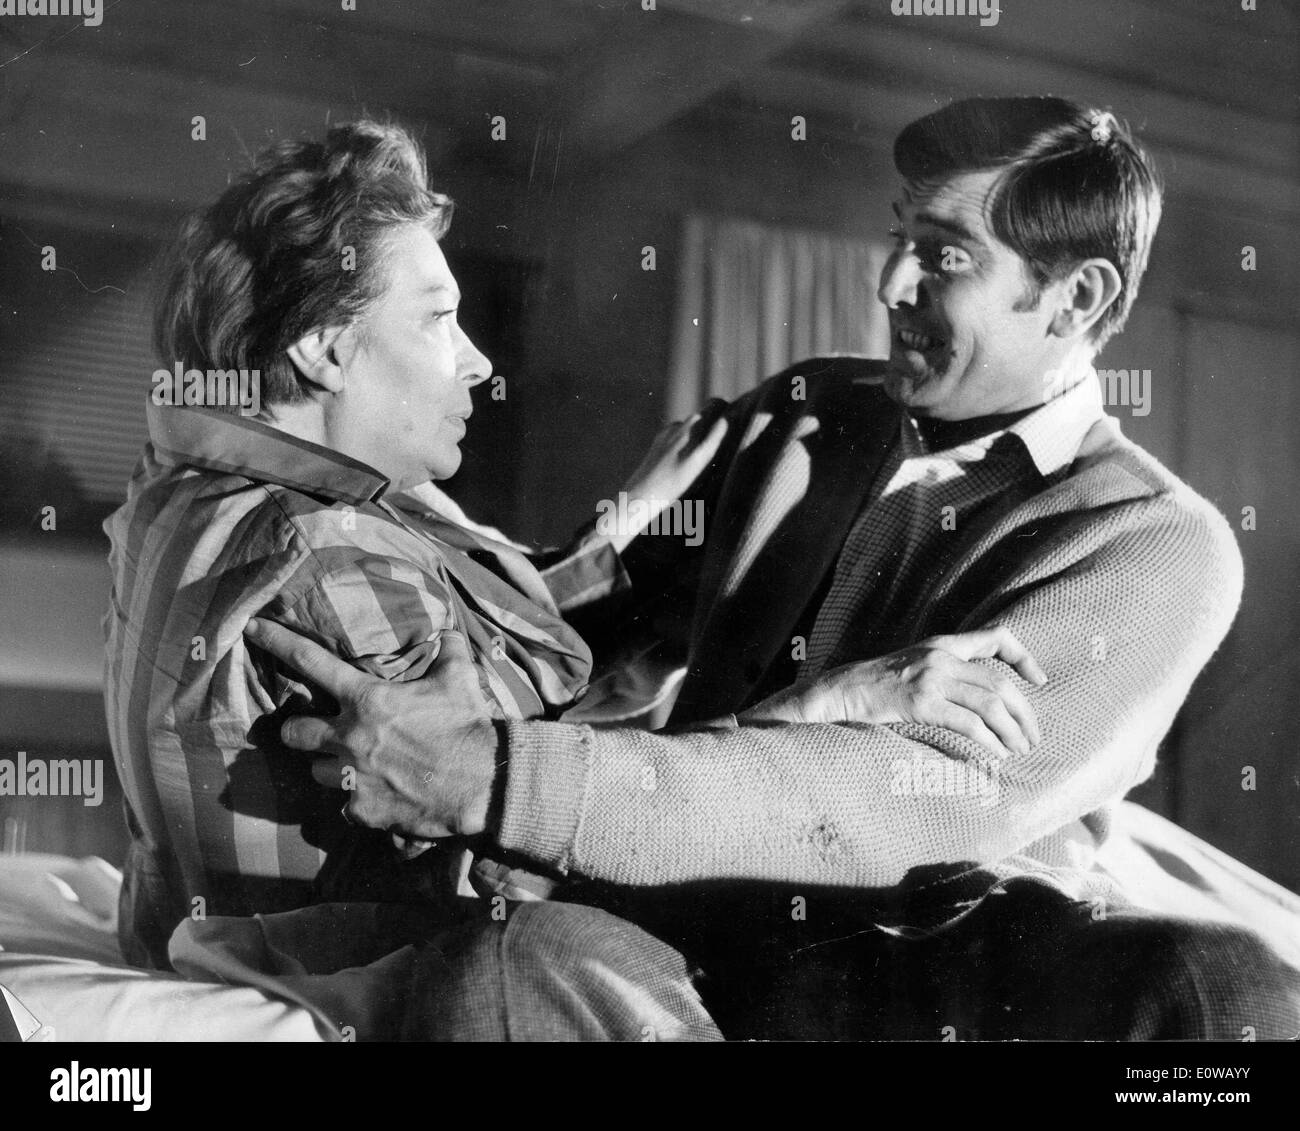 Actor George Lazenby and co-star in film scene Stock Photo